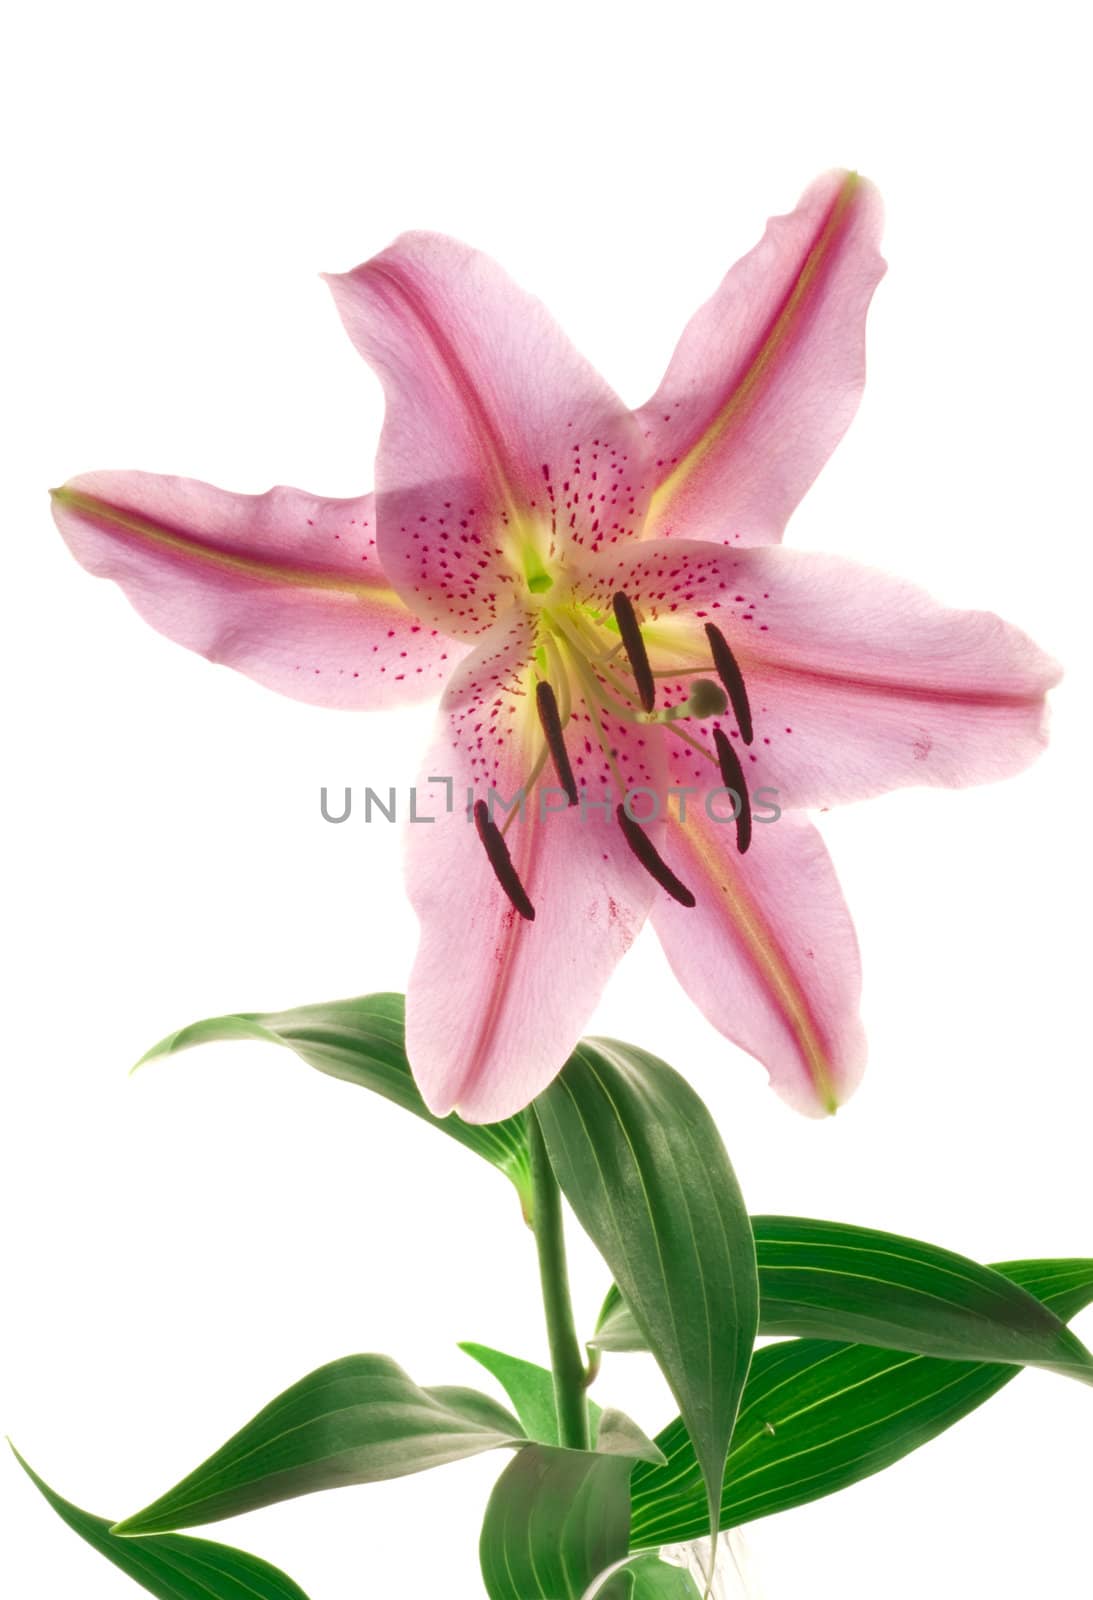 Lily by Marcus